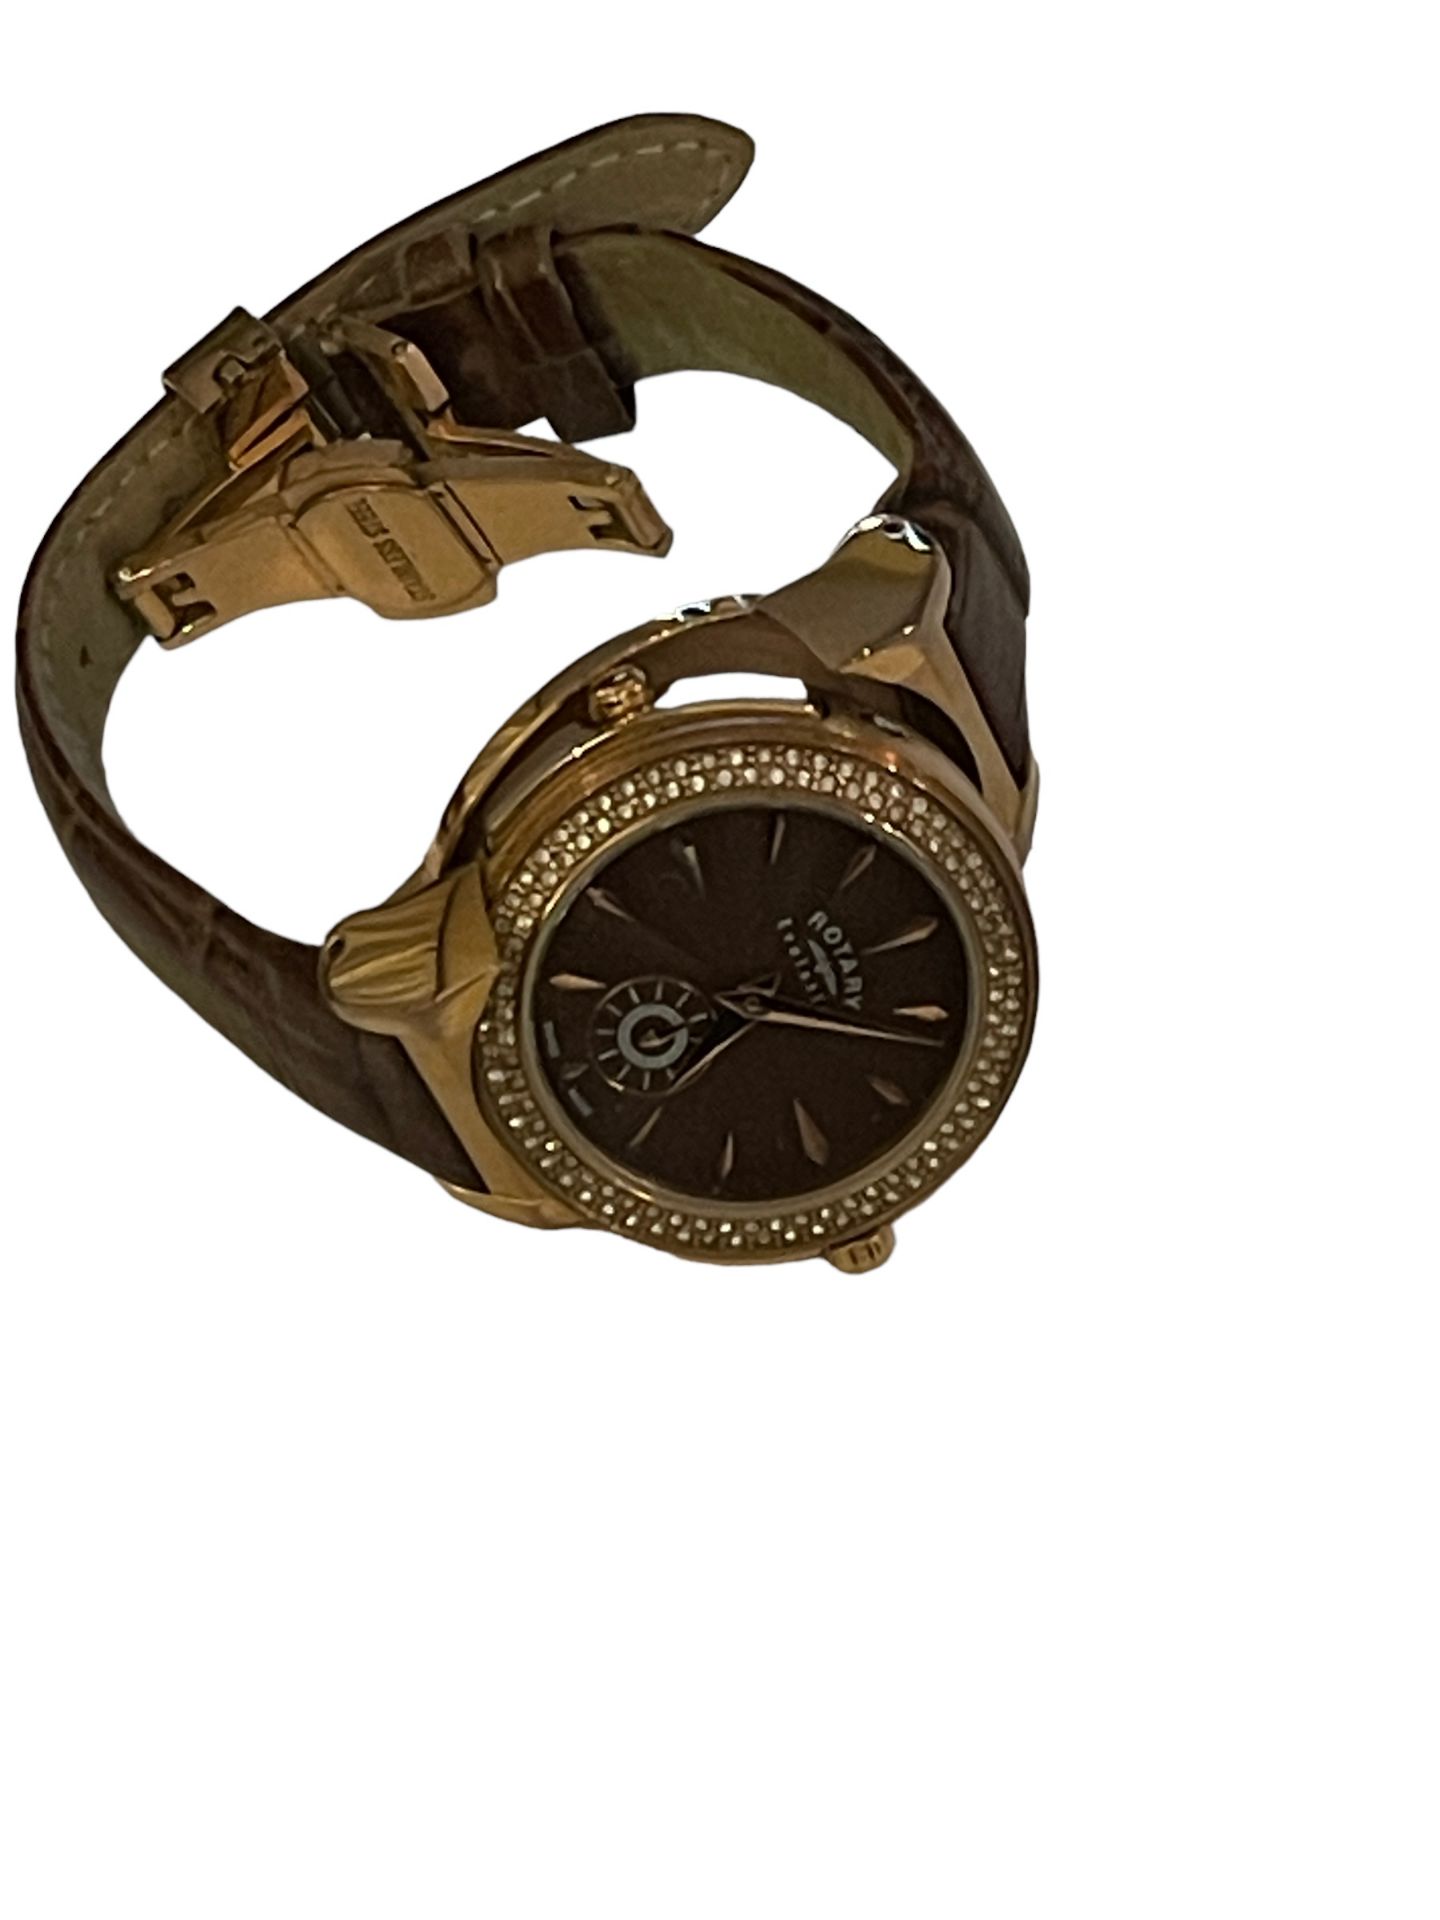 Rotary watch return/spares/lost property from a private jet charter with no reserve - Image 2 of 4